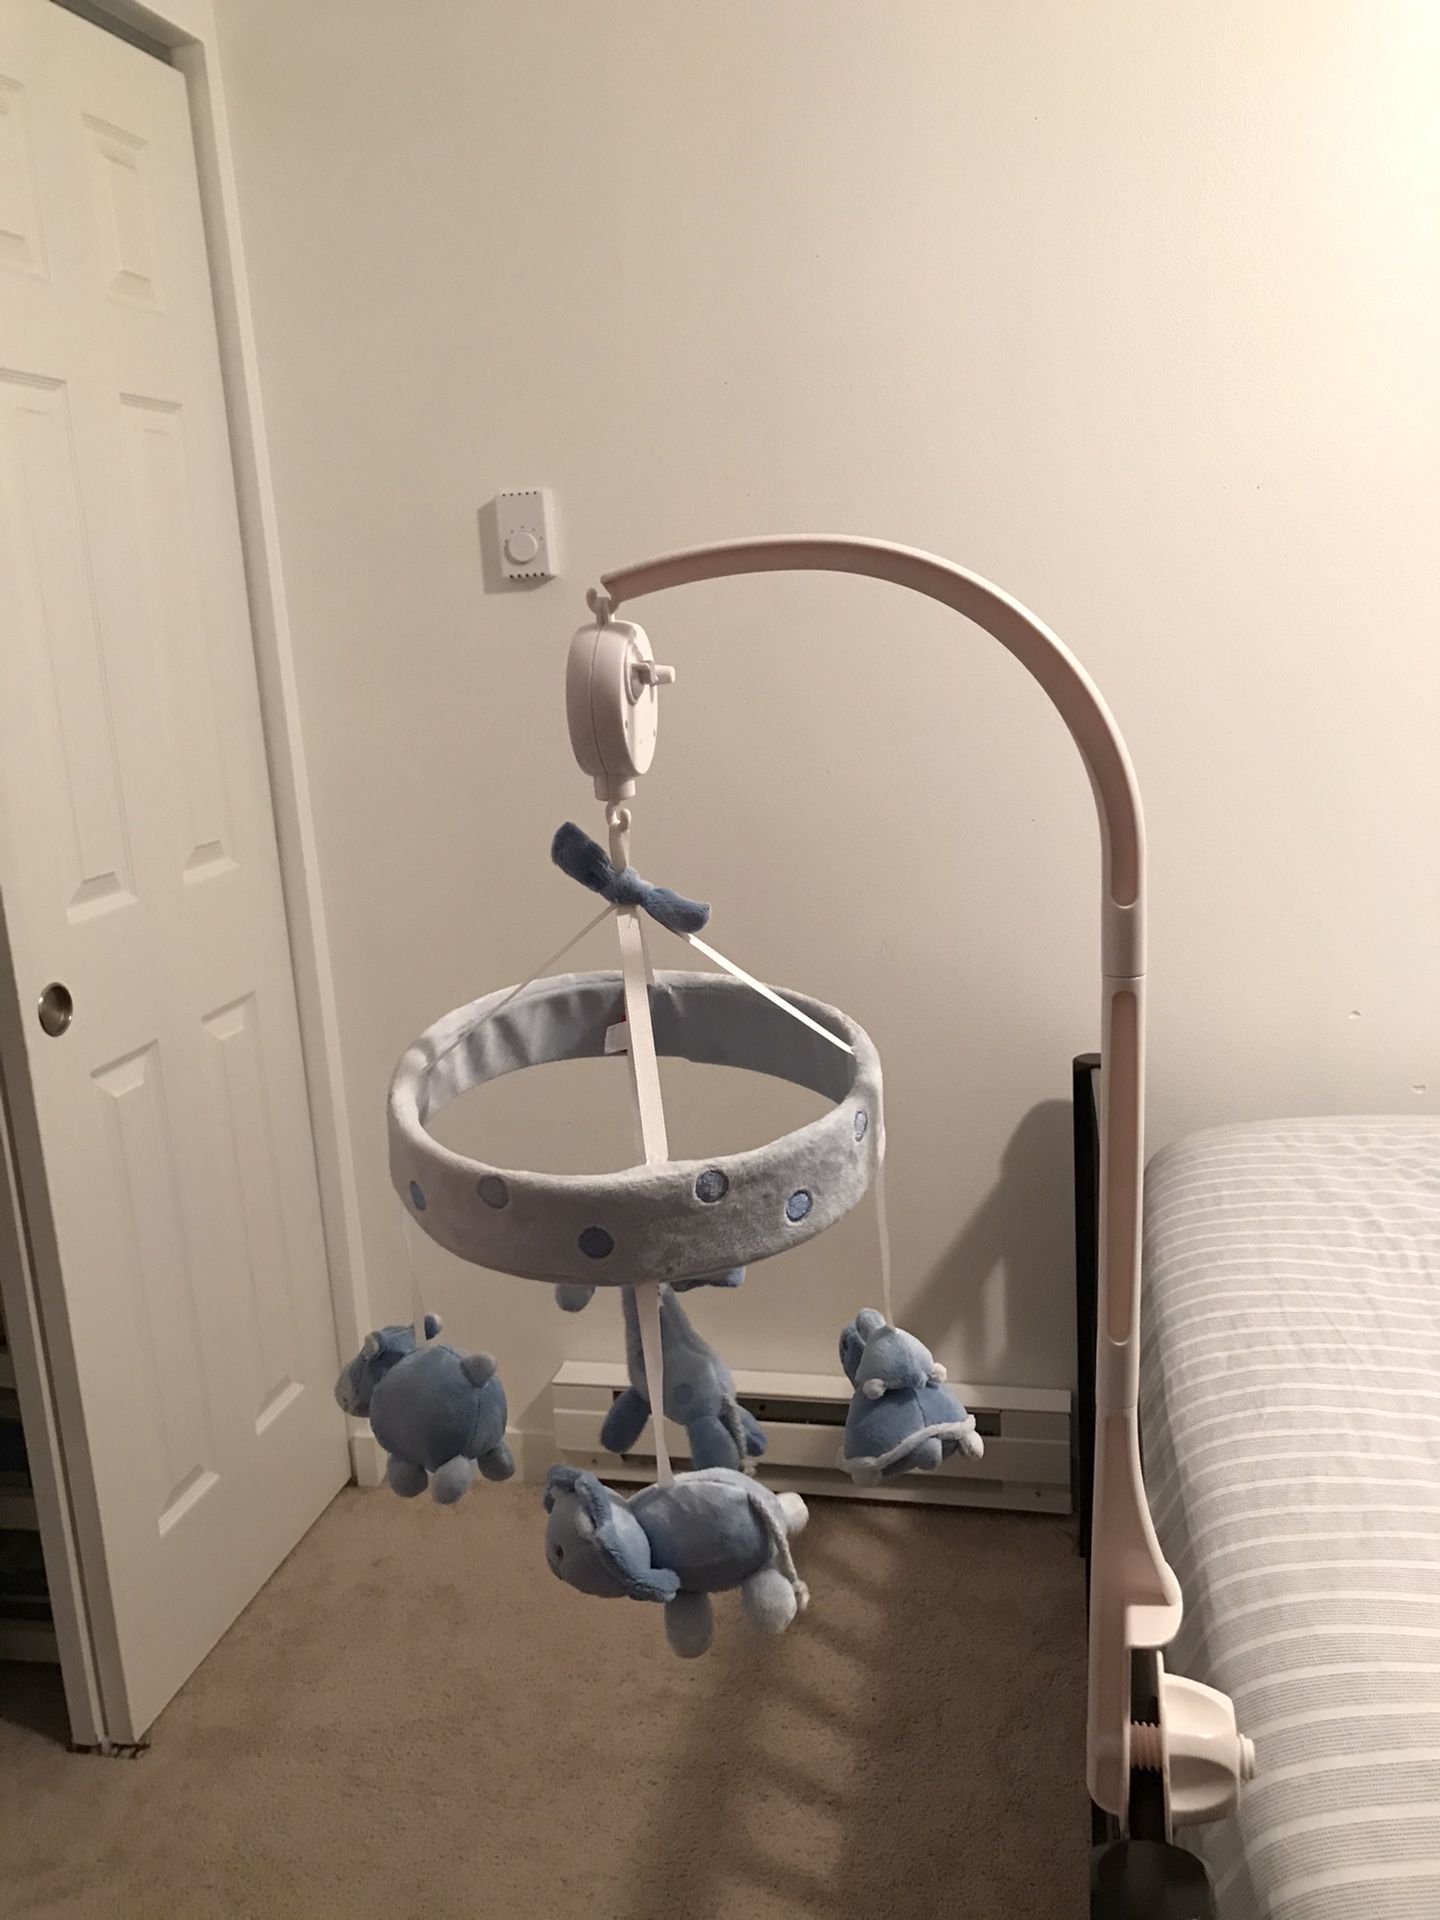 Crib toy for babies